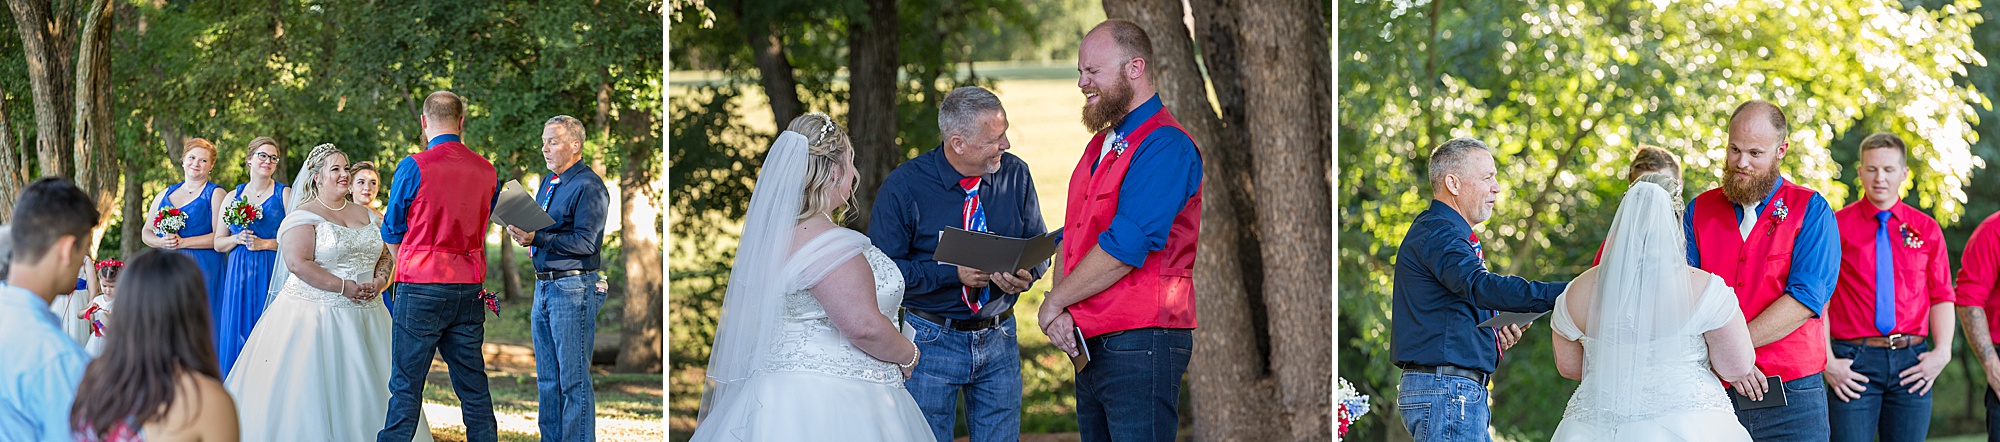 bride and groom share vows